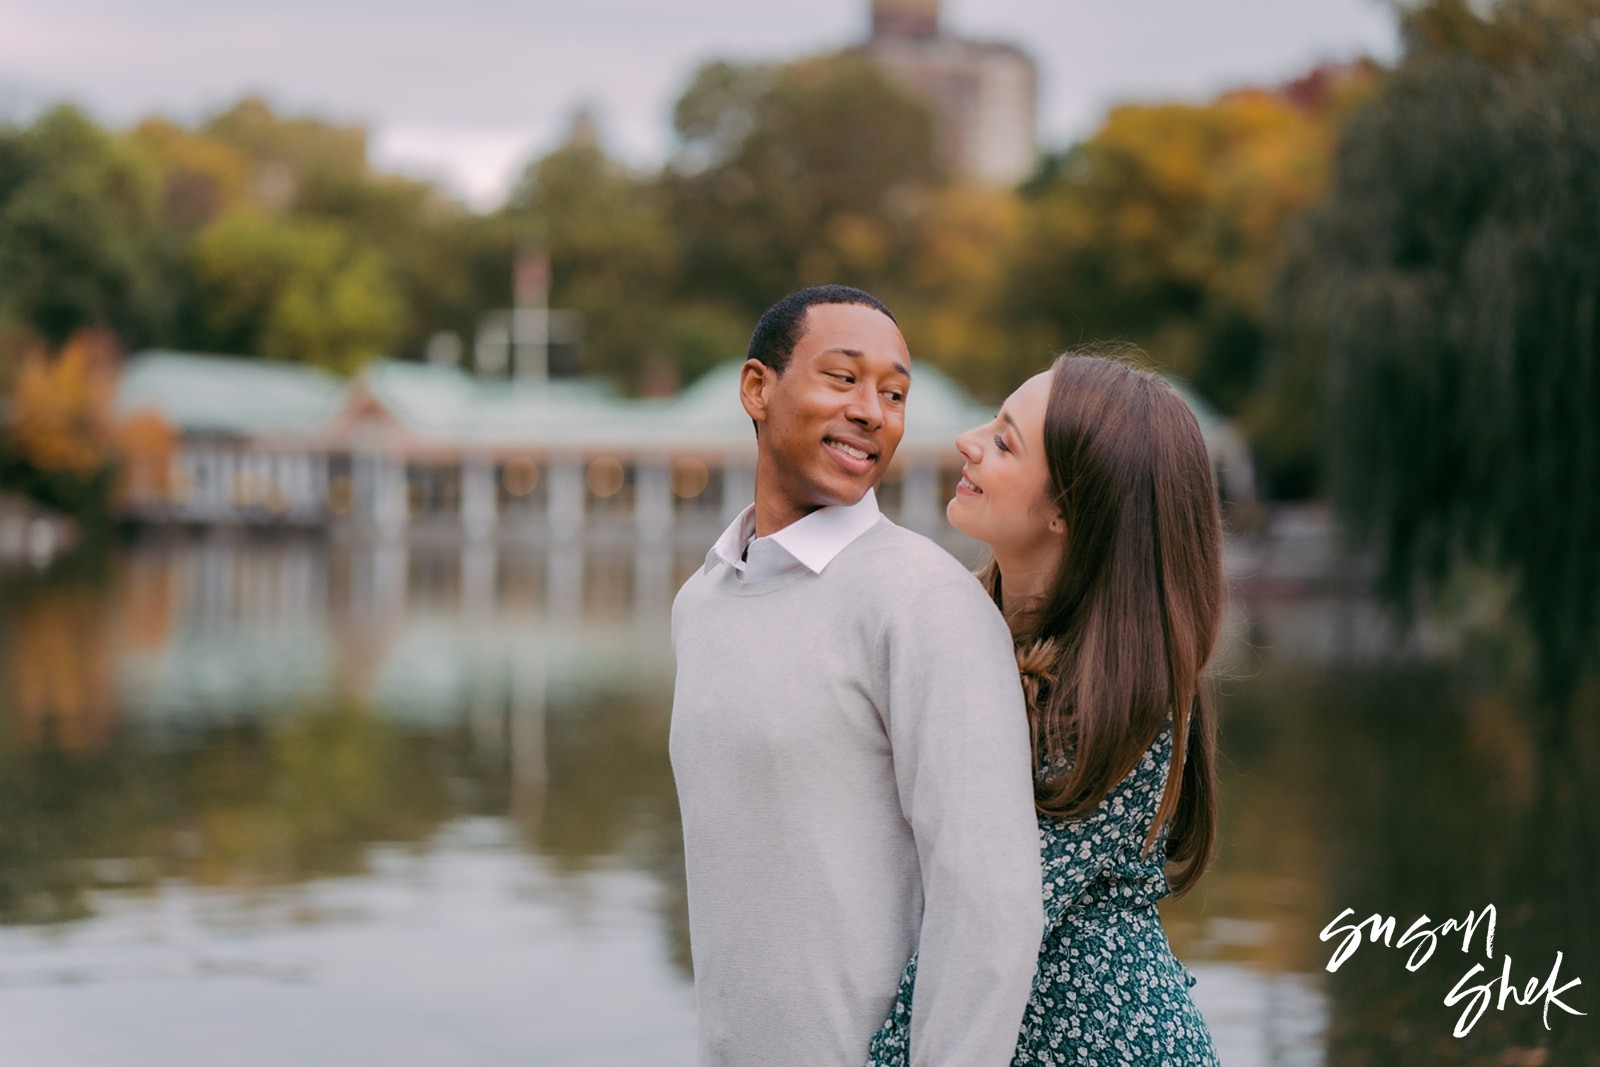 Exquisite Engagement Photo Ideas For The Most Special Time